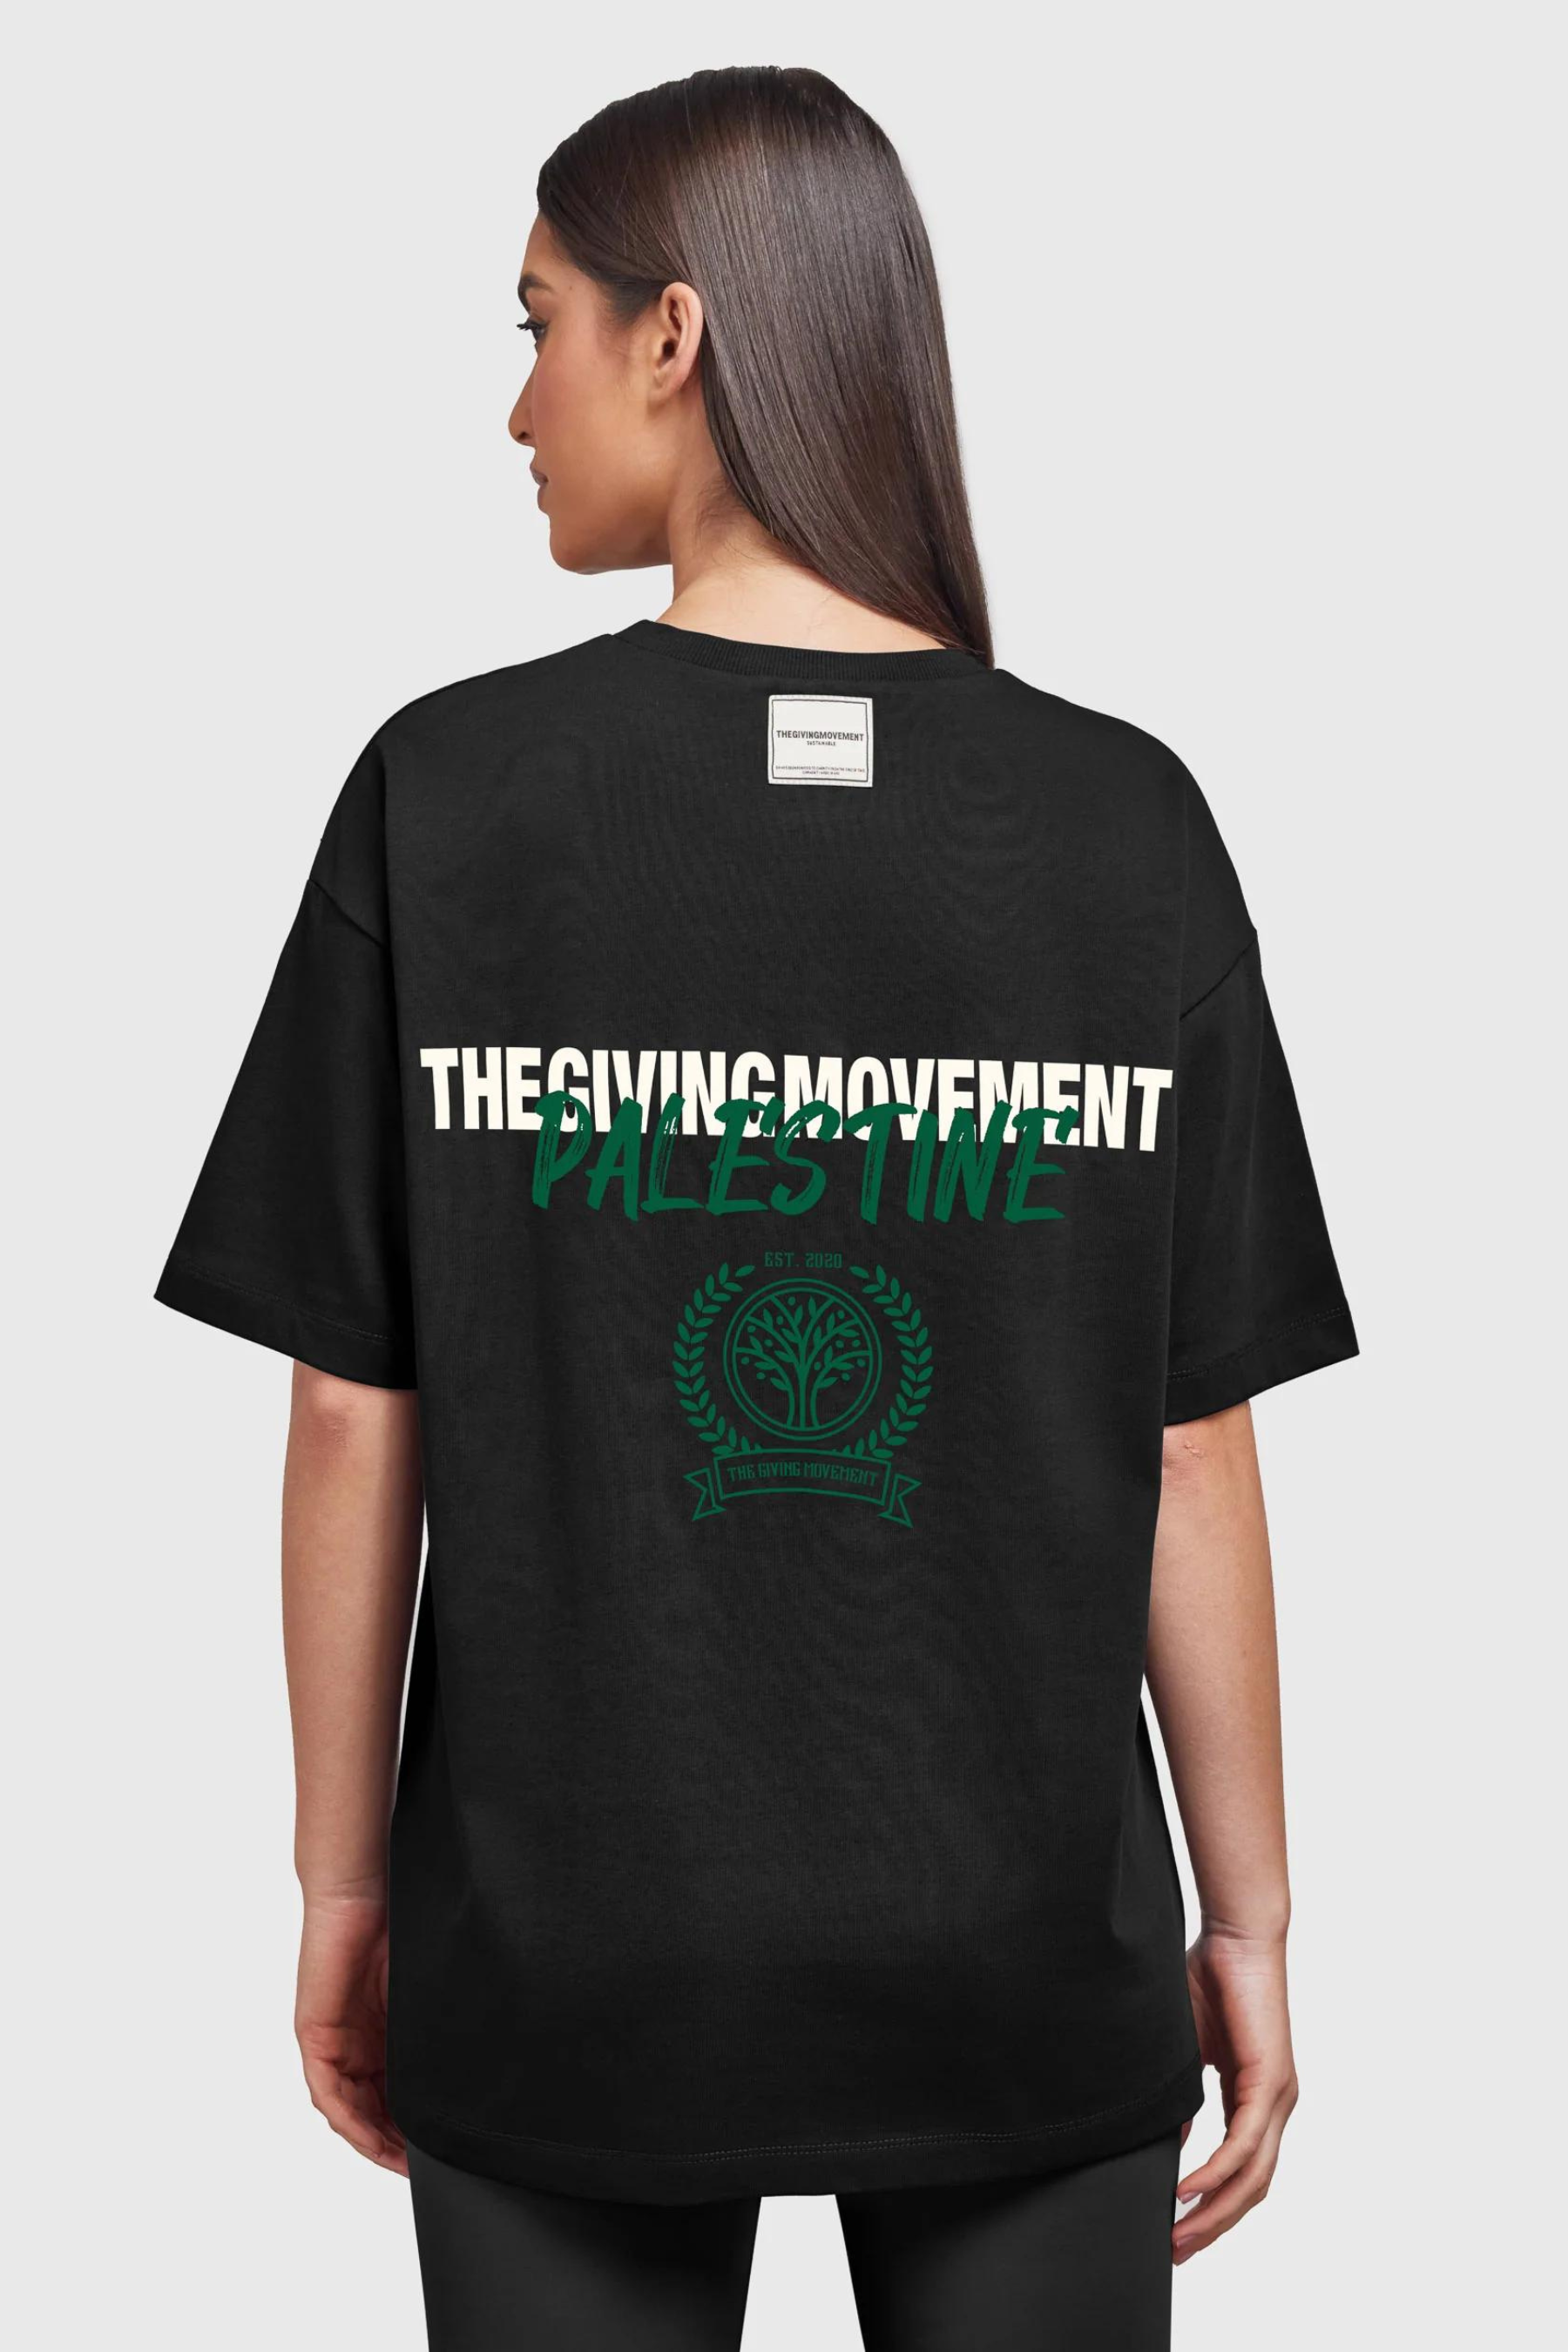 the giving movement t-shirt